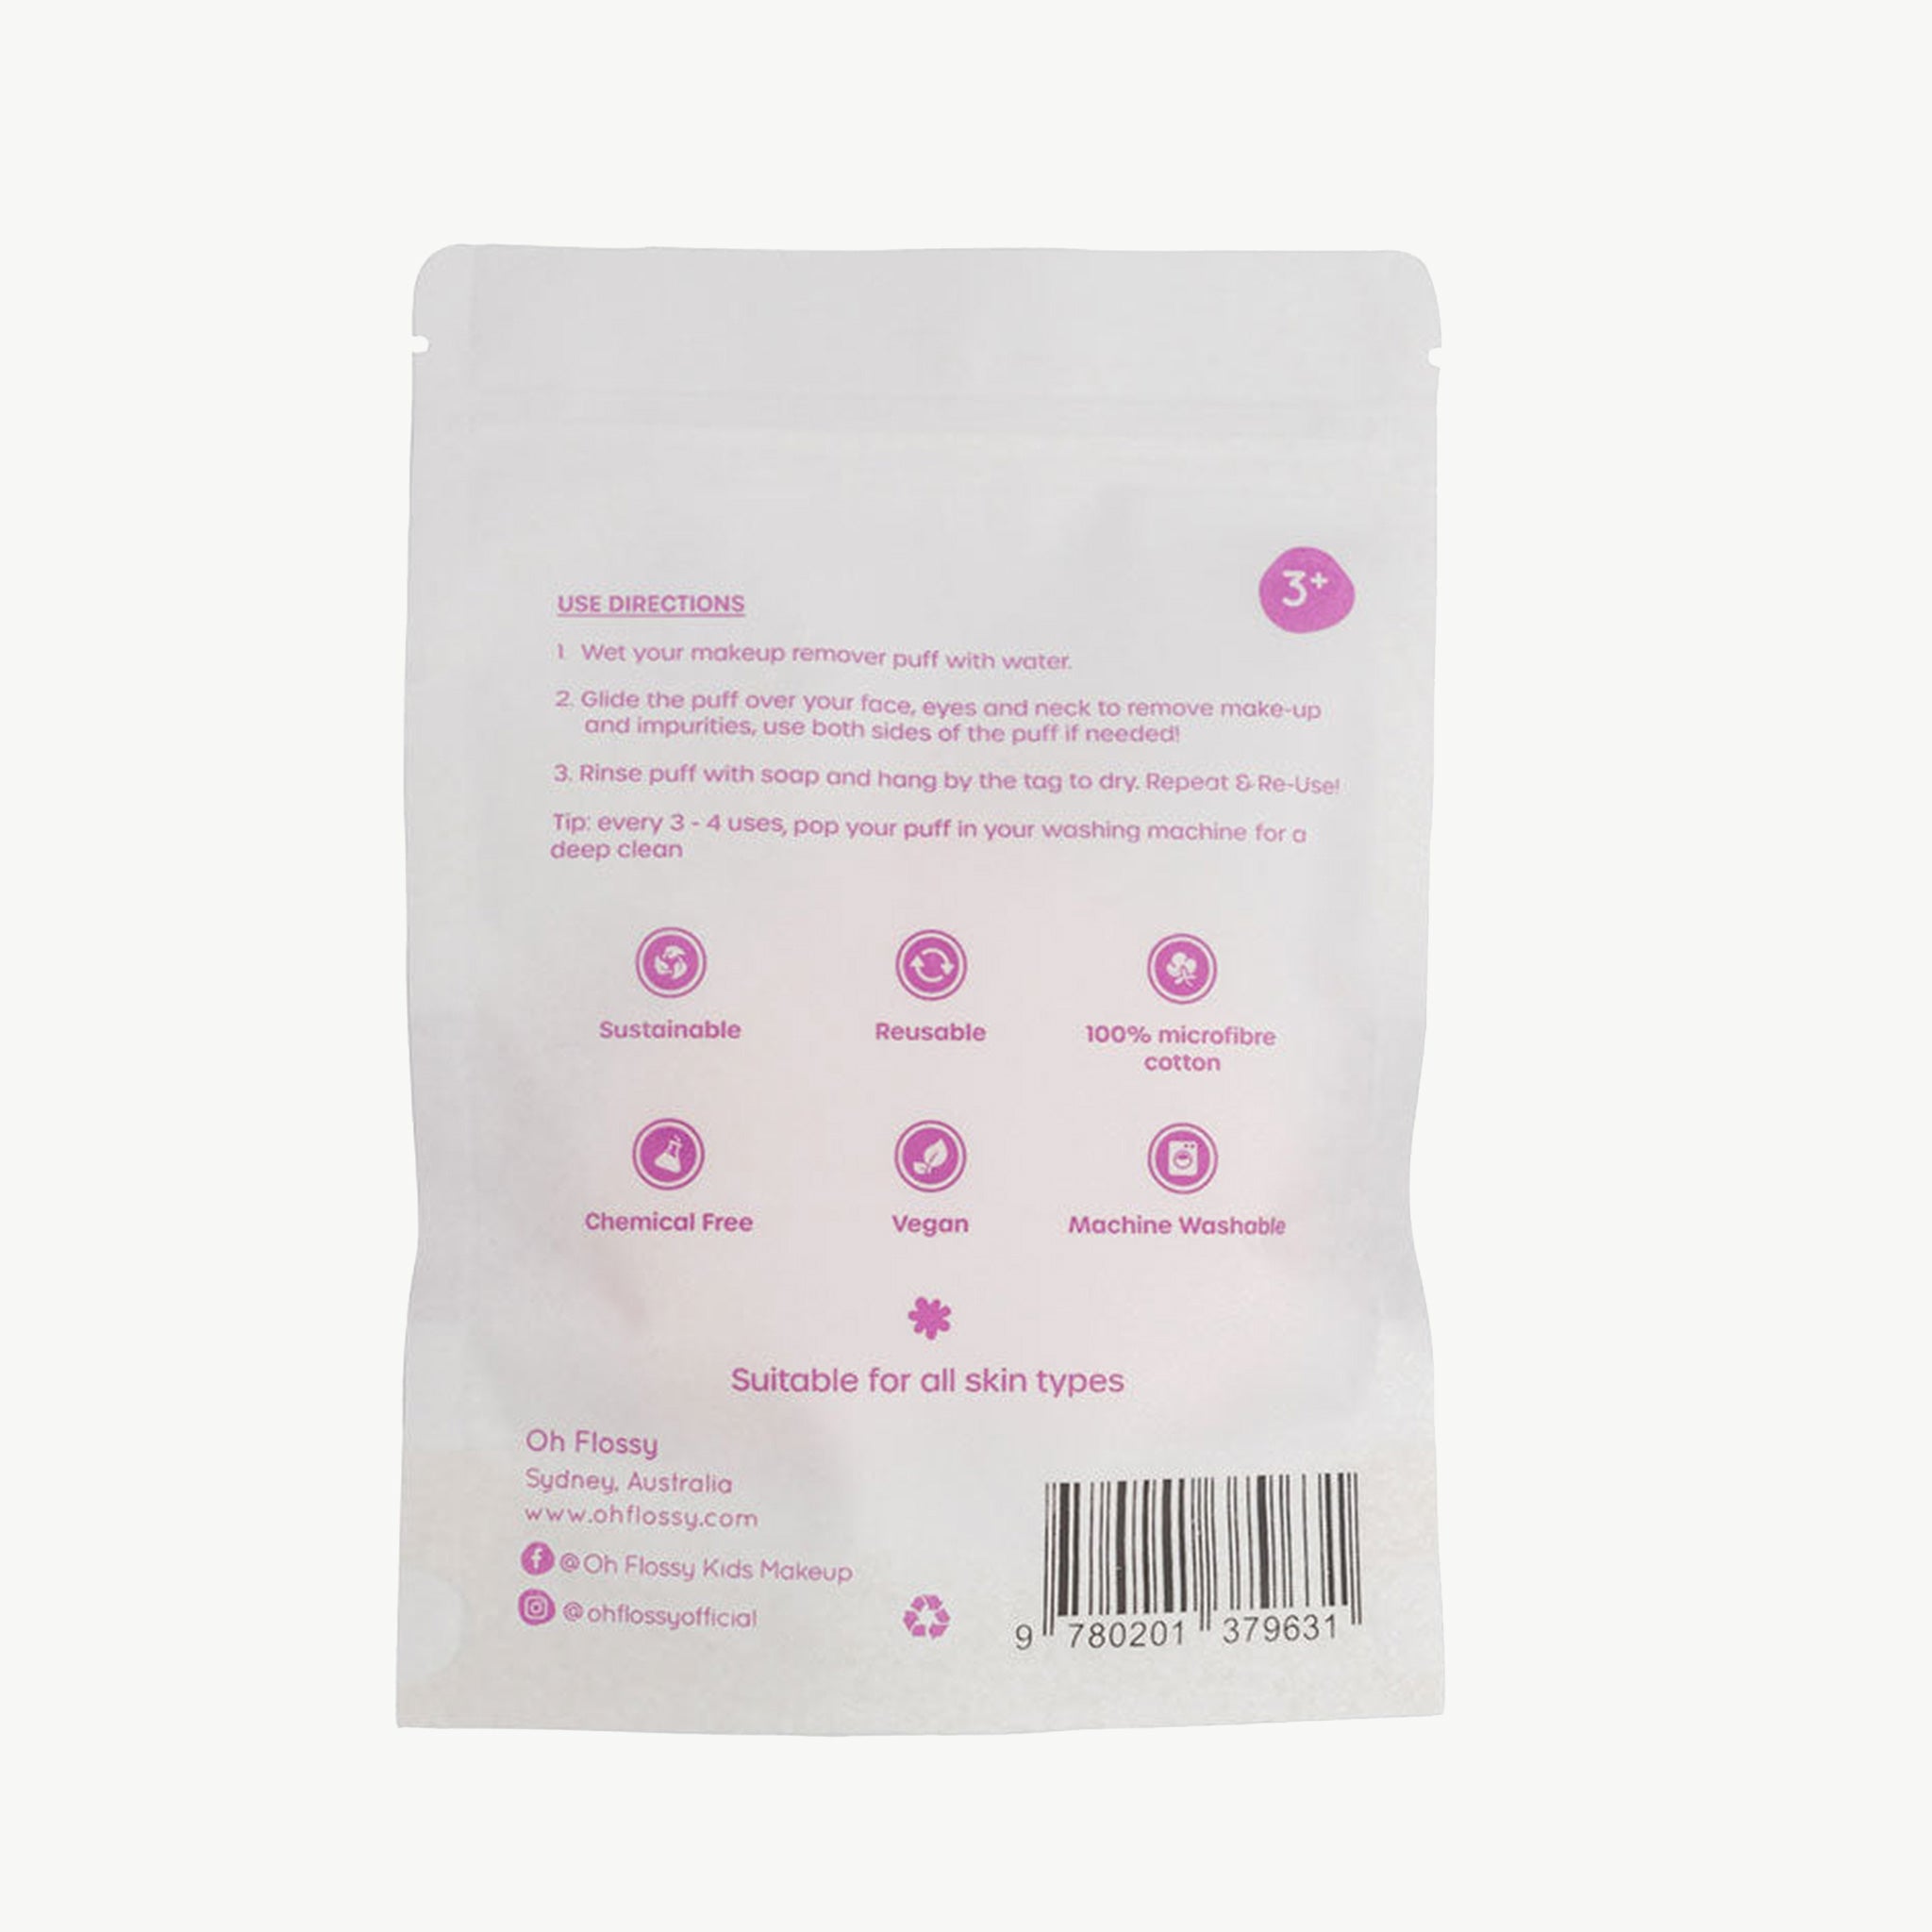 Oh-Flossy-makeup-remover-puff-back-packaging